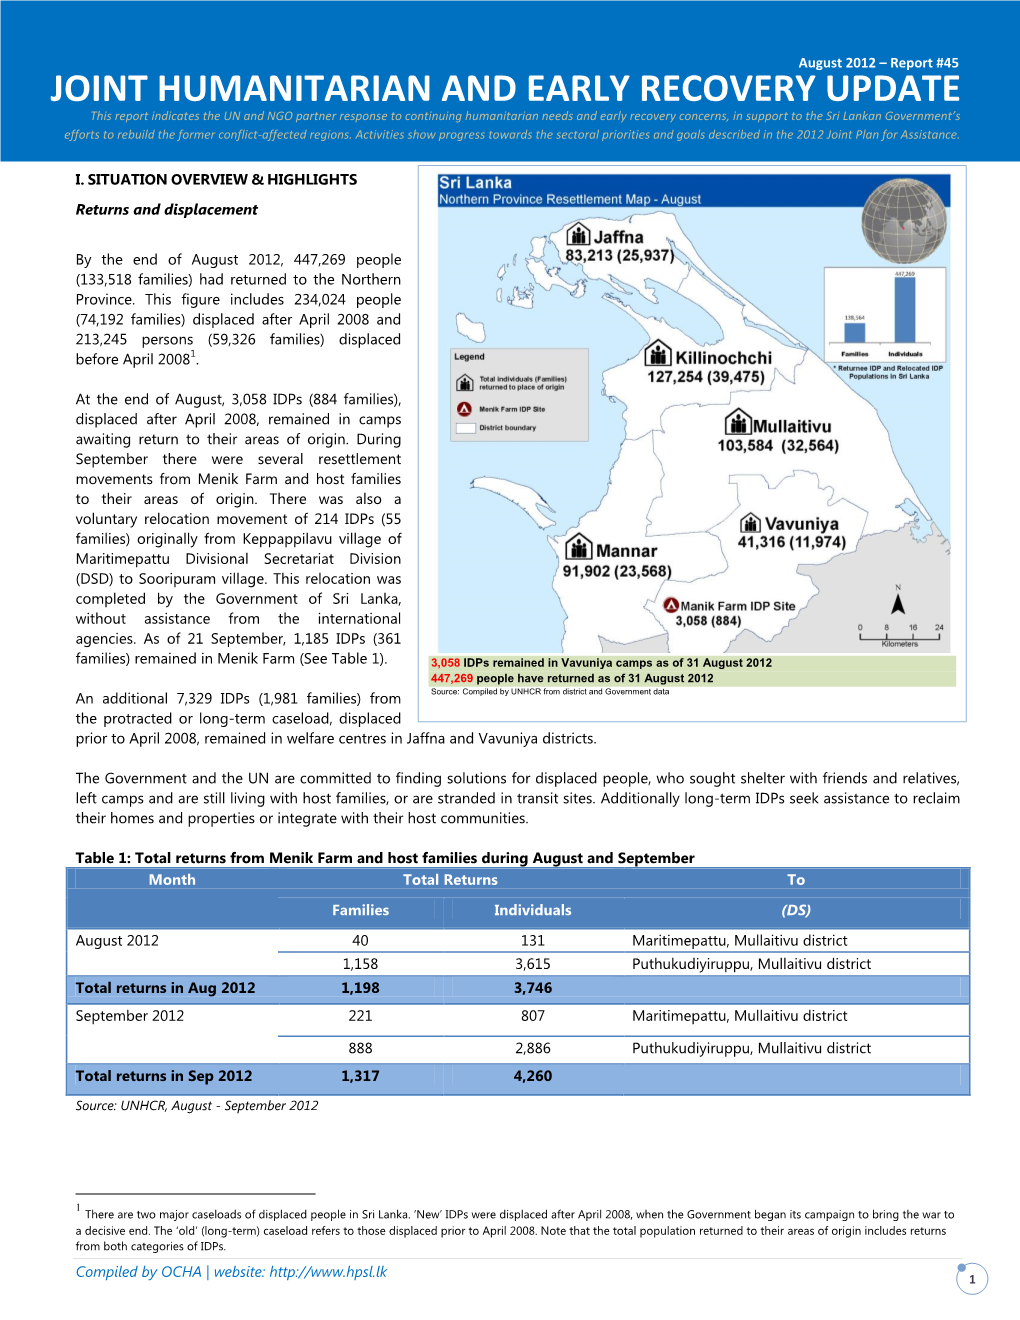 JOINT HUMANITARIAN and EARLY RECOVERY UPDATE August 2012 – Report #45